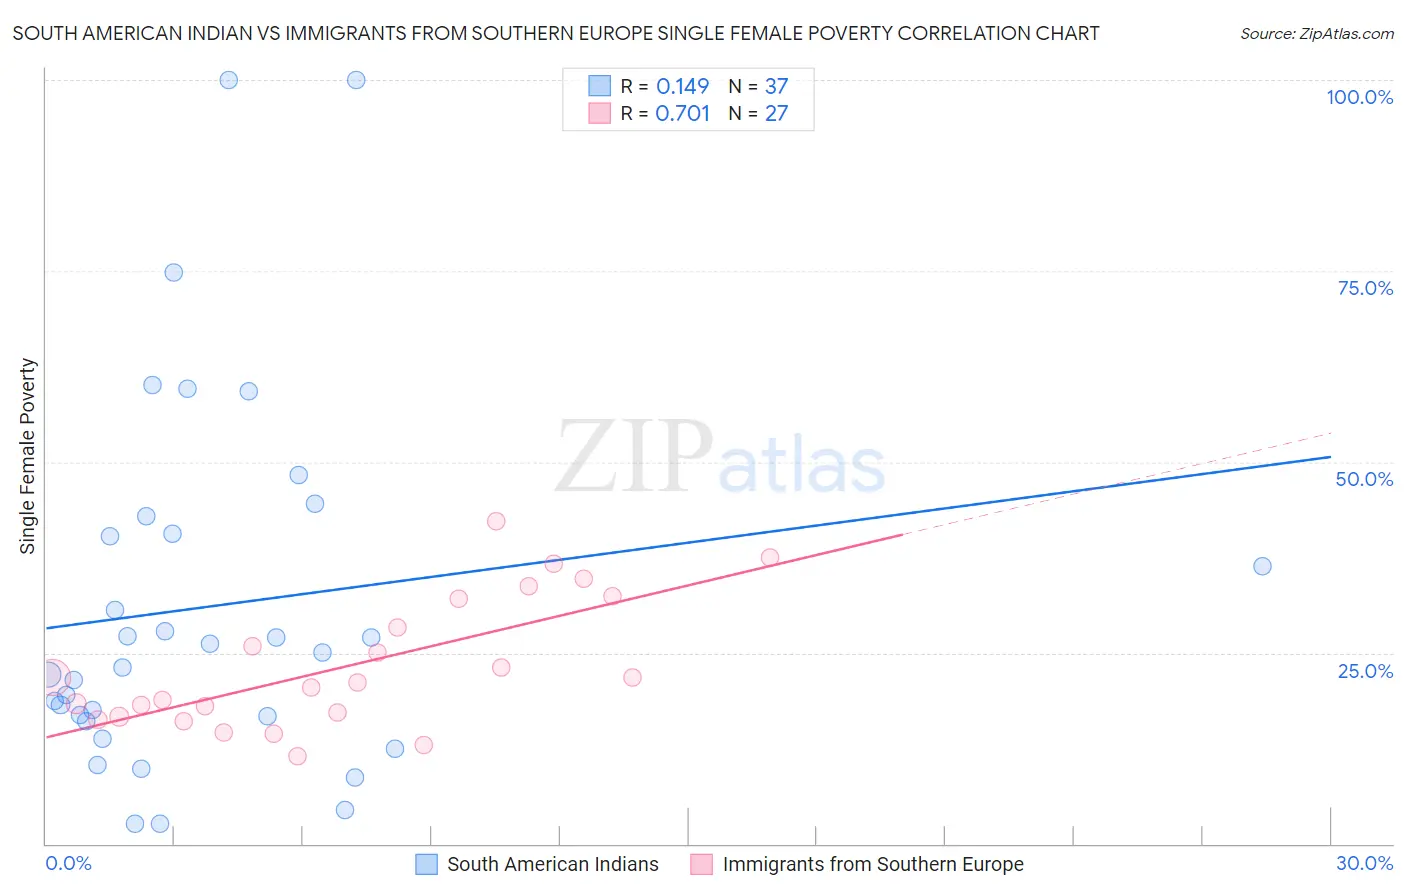 South American Indian vs Immigrants from Southern Europe Single Female Poverty